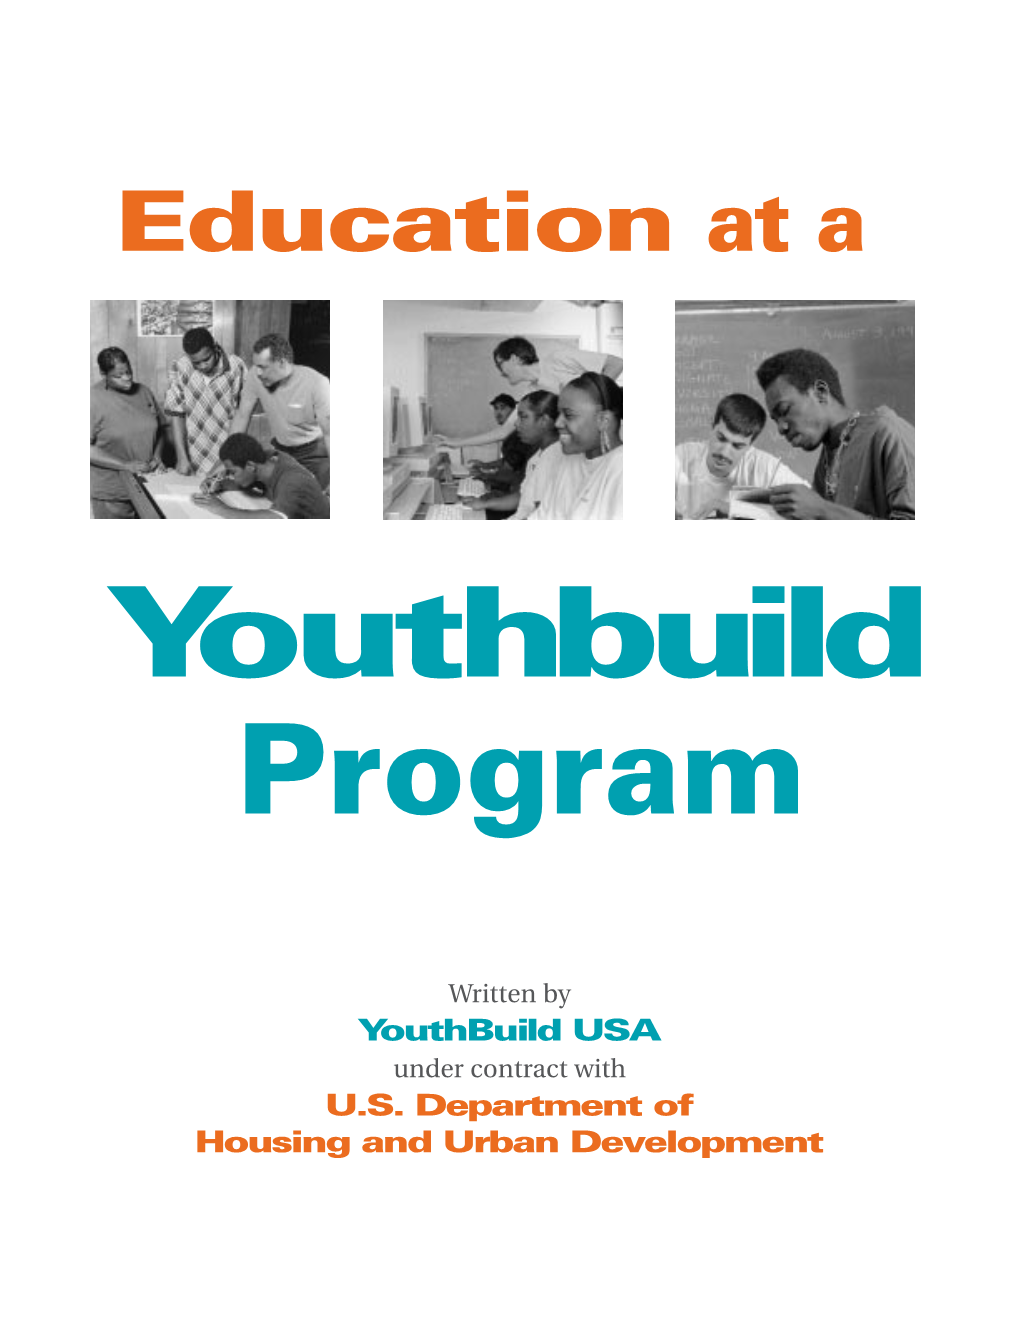 Youthbuild USA Under Contract with U.S